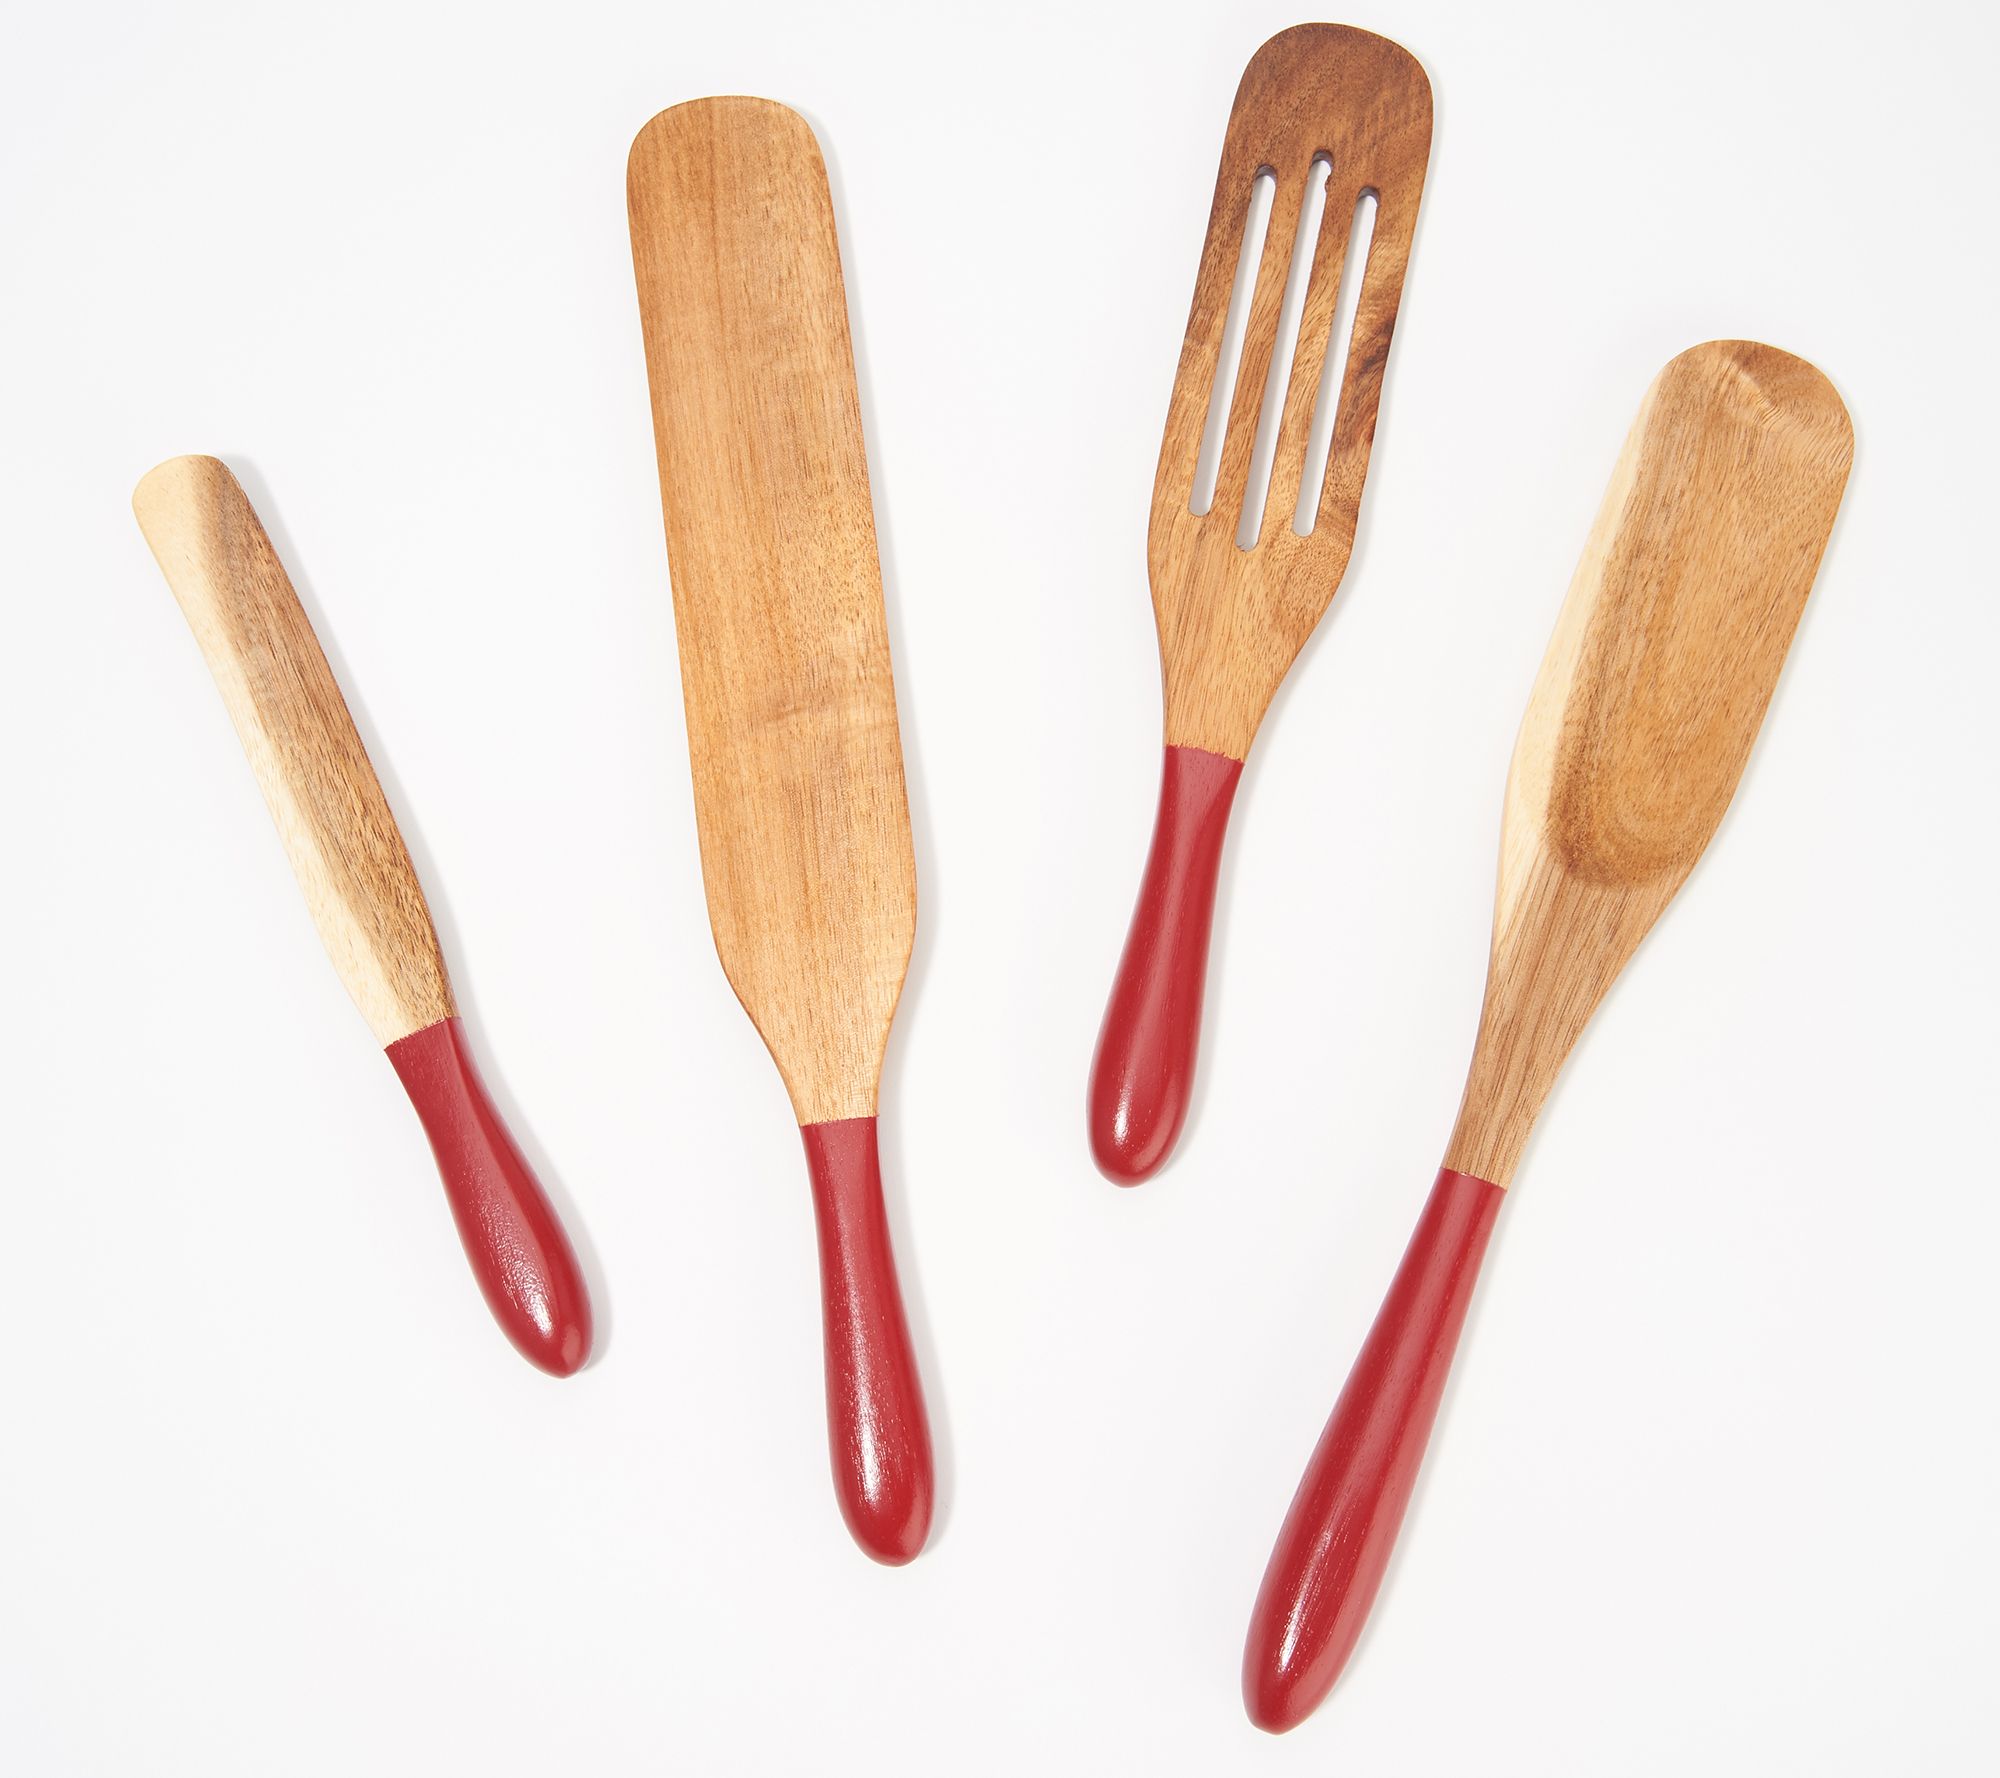 Mad Hungry 4 piece Multi-Use Silicone Spurtle Set - QVC.com